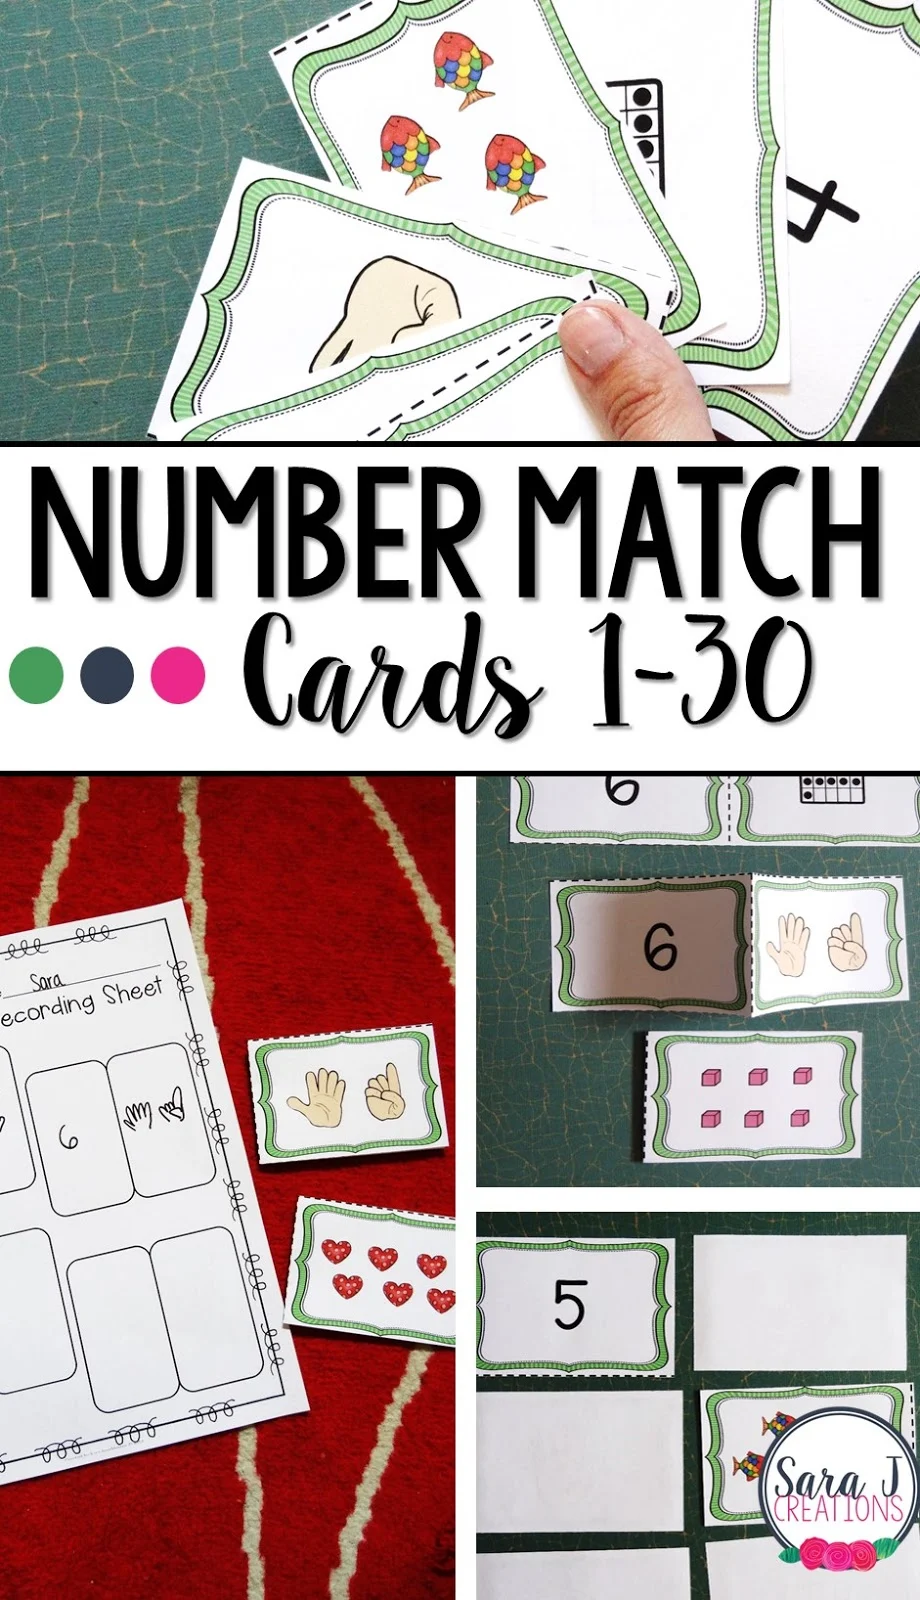 Number match cards make fun learning games for students who need to practice numbers 1-30.